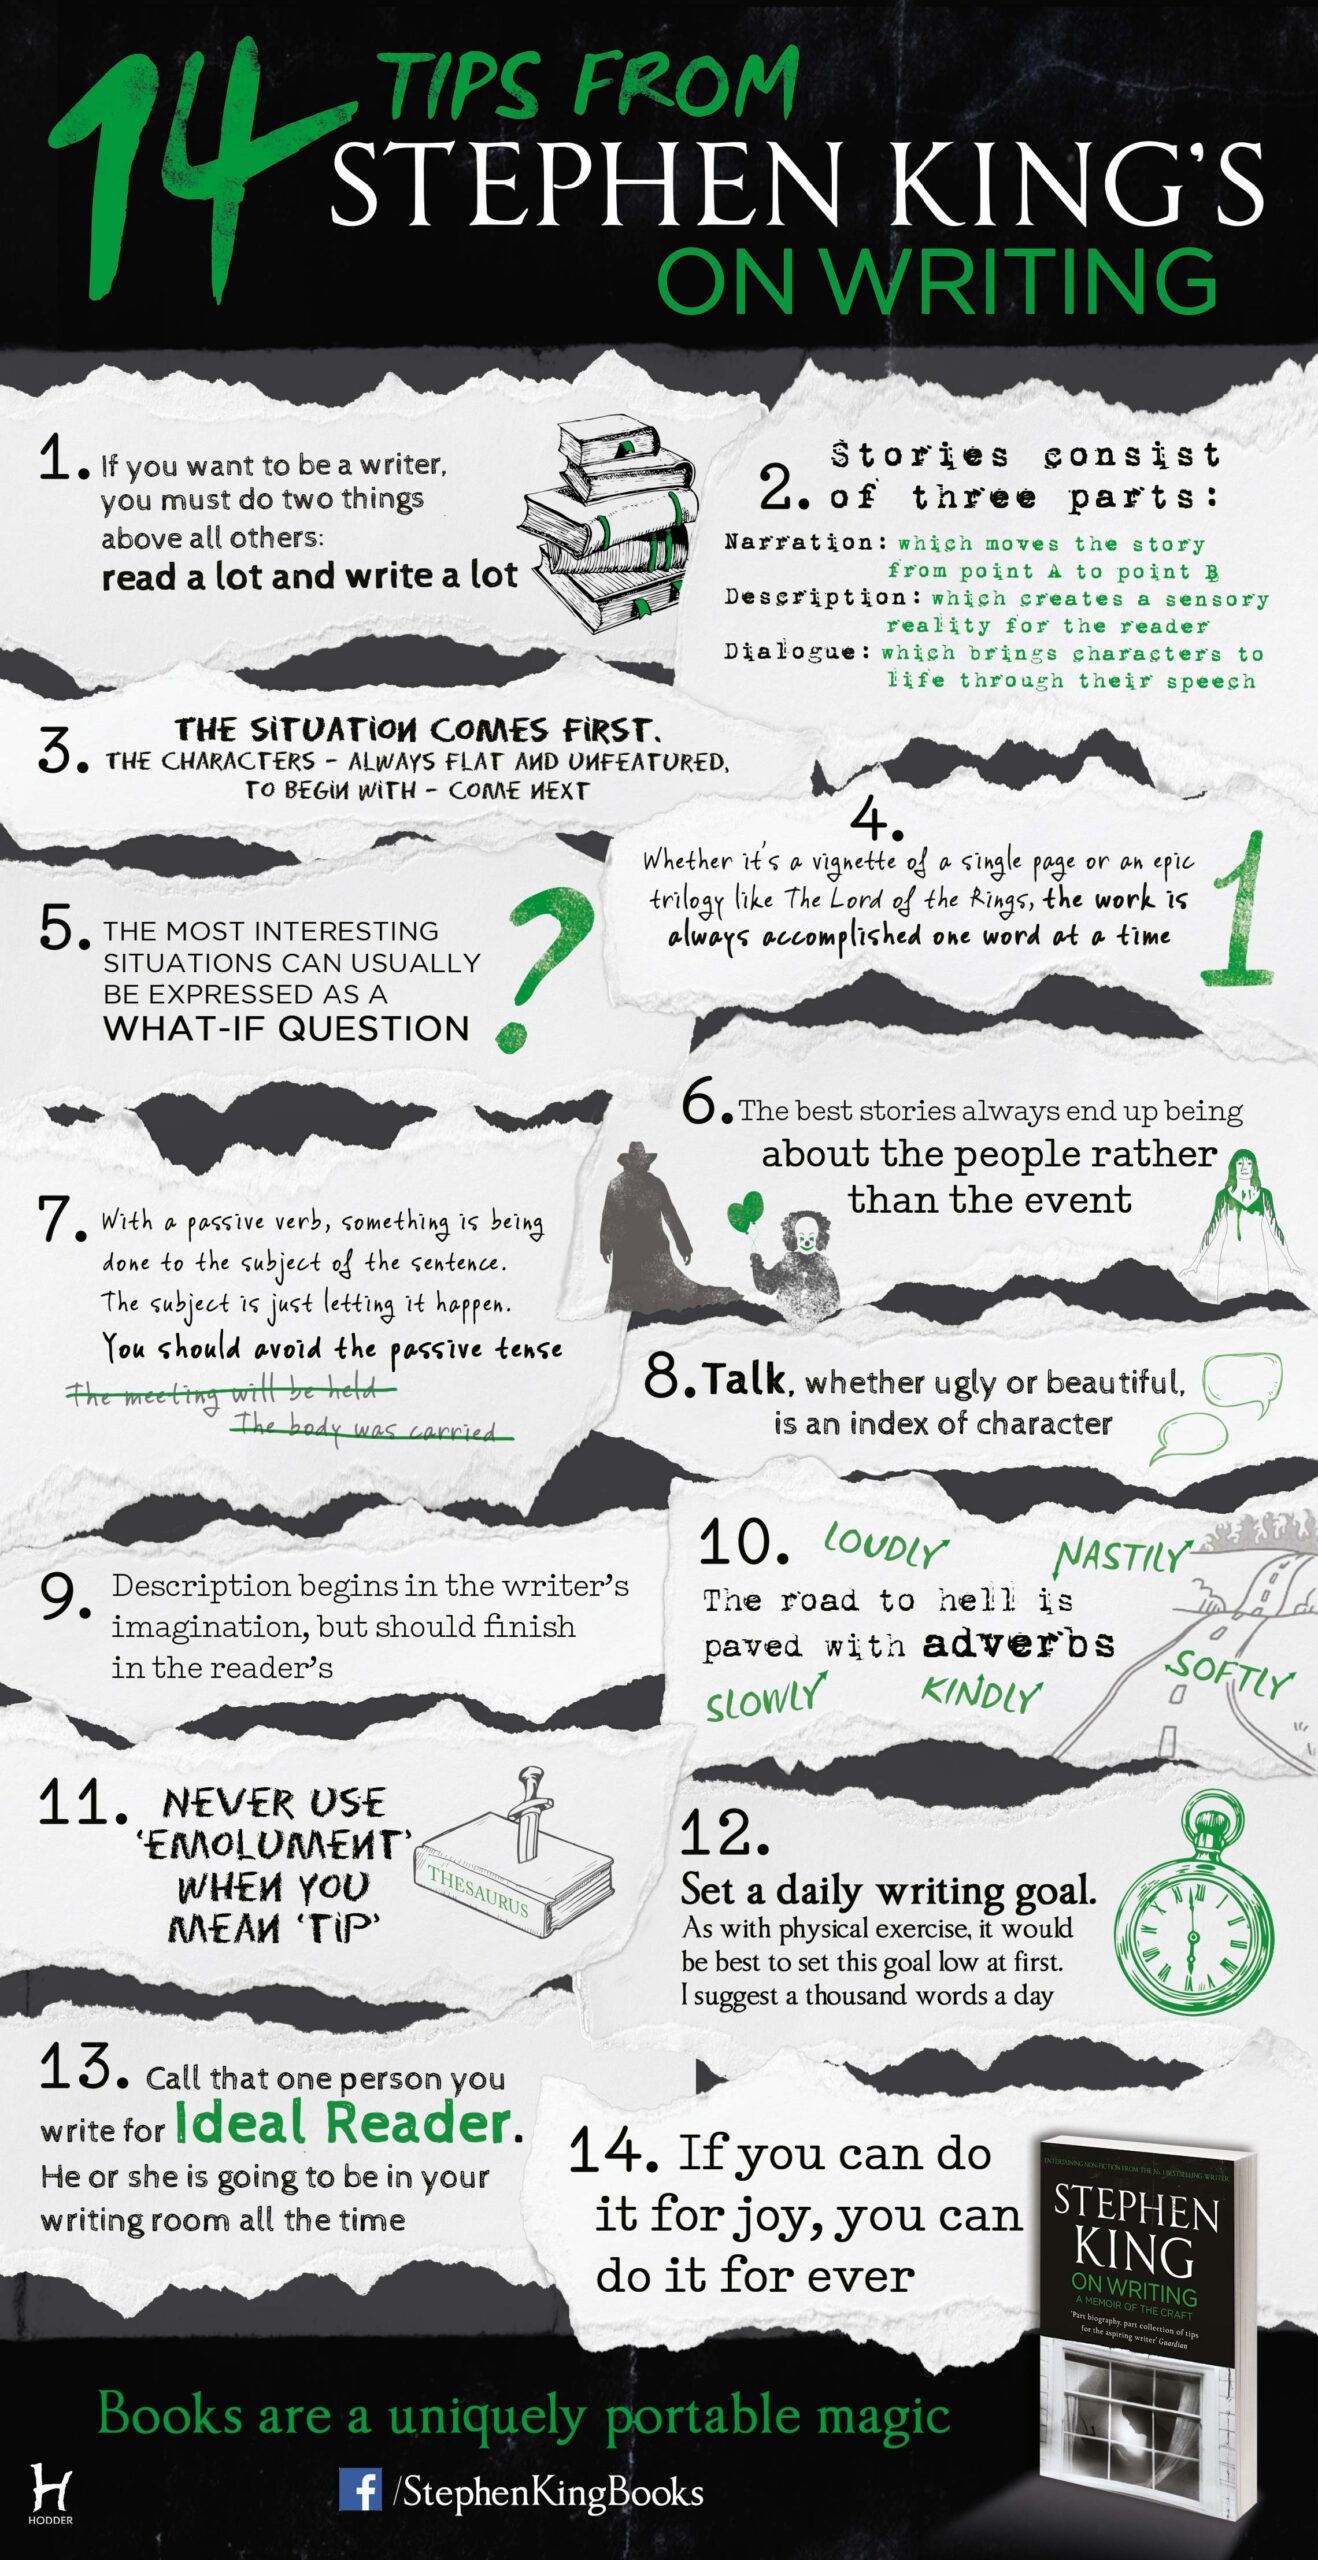 An infographic of Stephen King's tips from "On Writing"